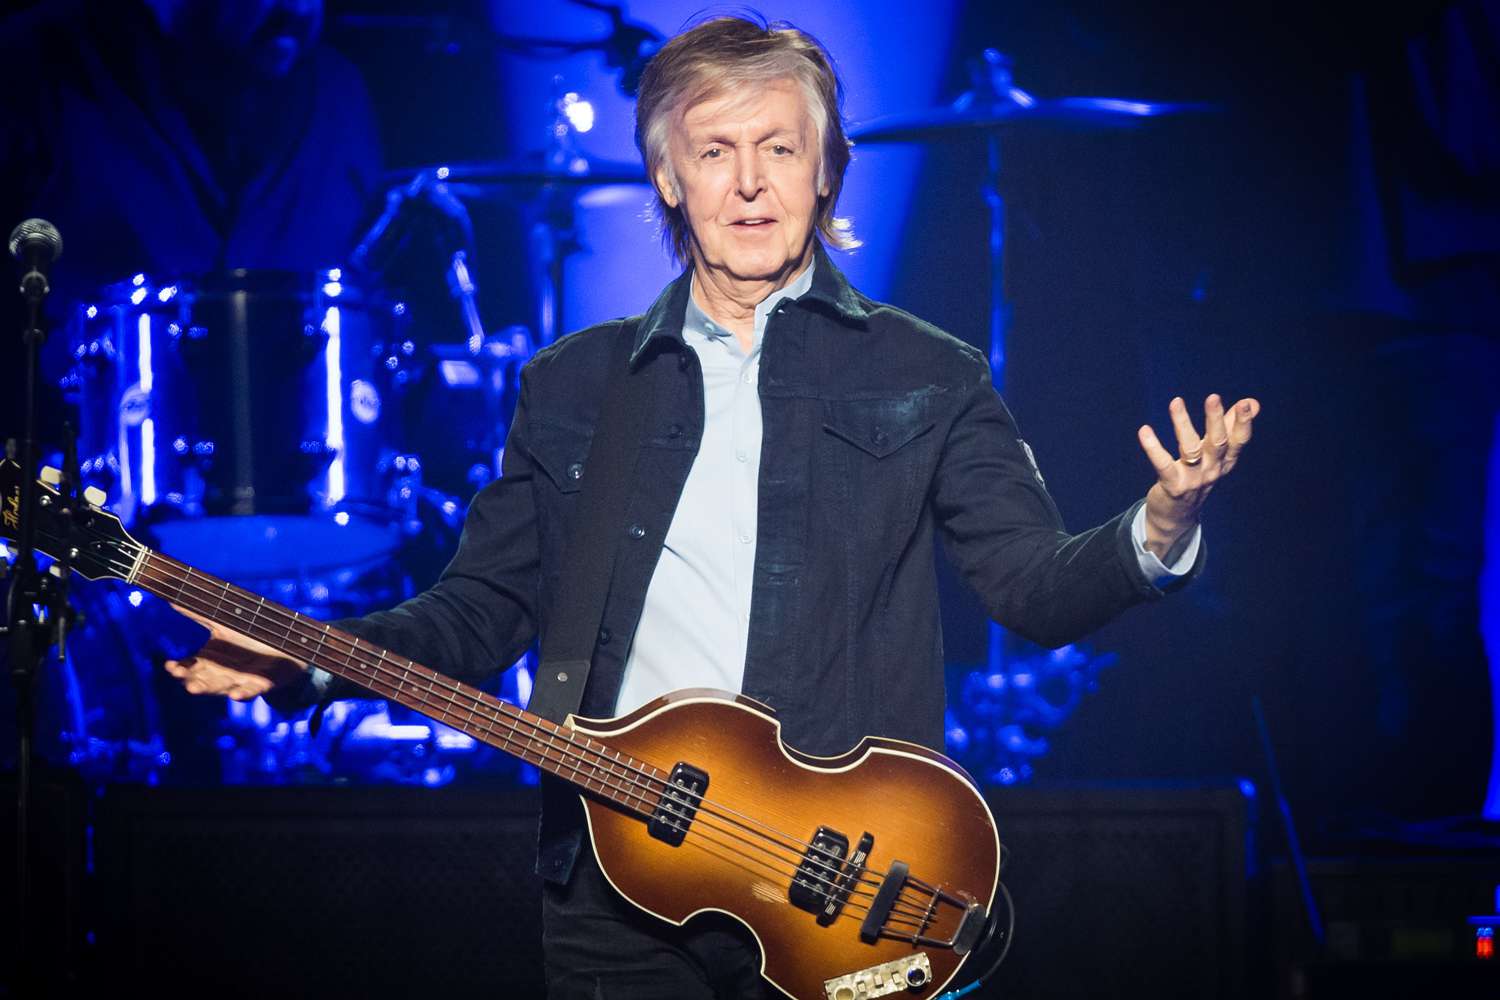 Paul McCartney Says He's 'Looking Forward to Being Spoilt Rotten' as He Celebrates 82nd Birthday